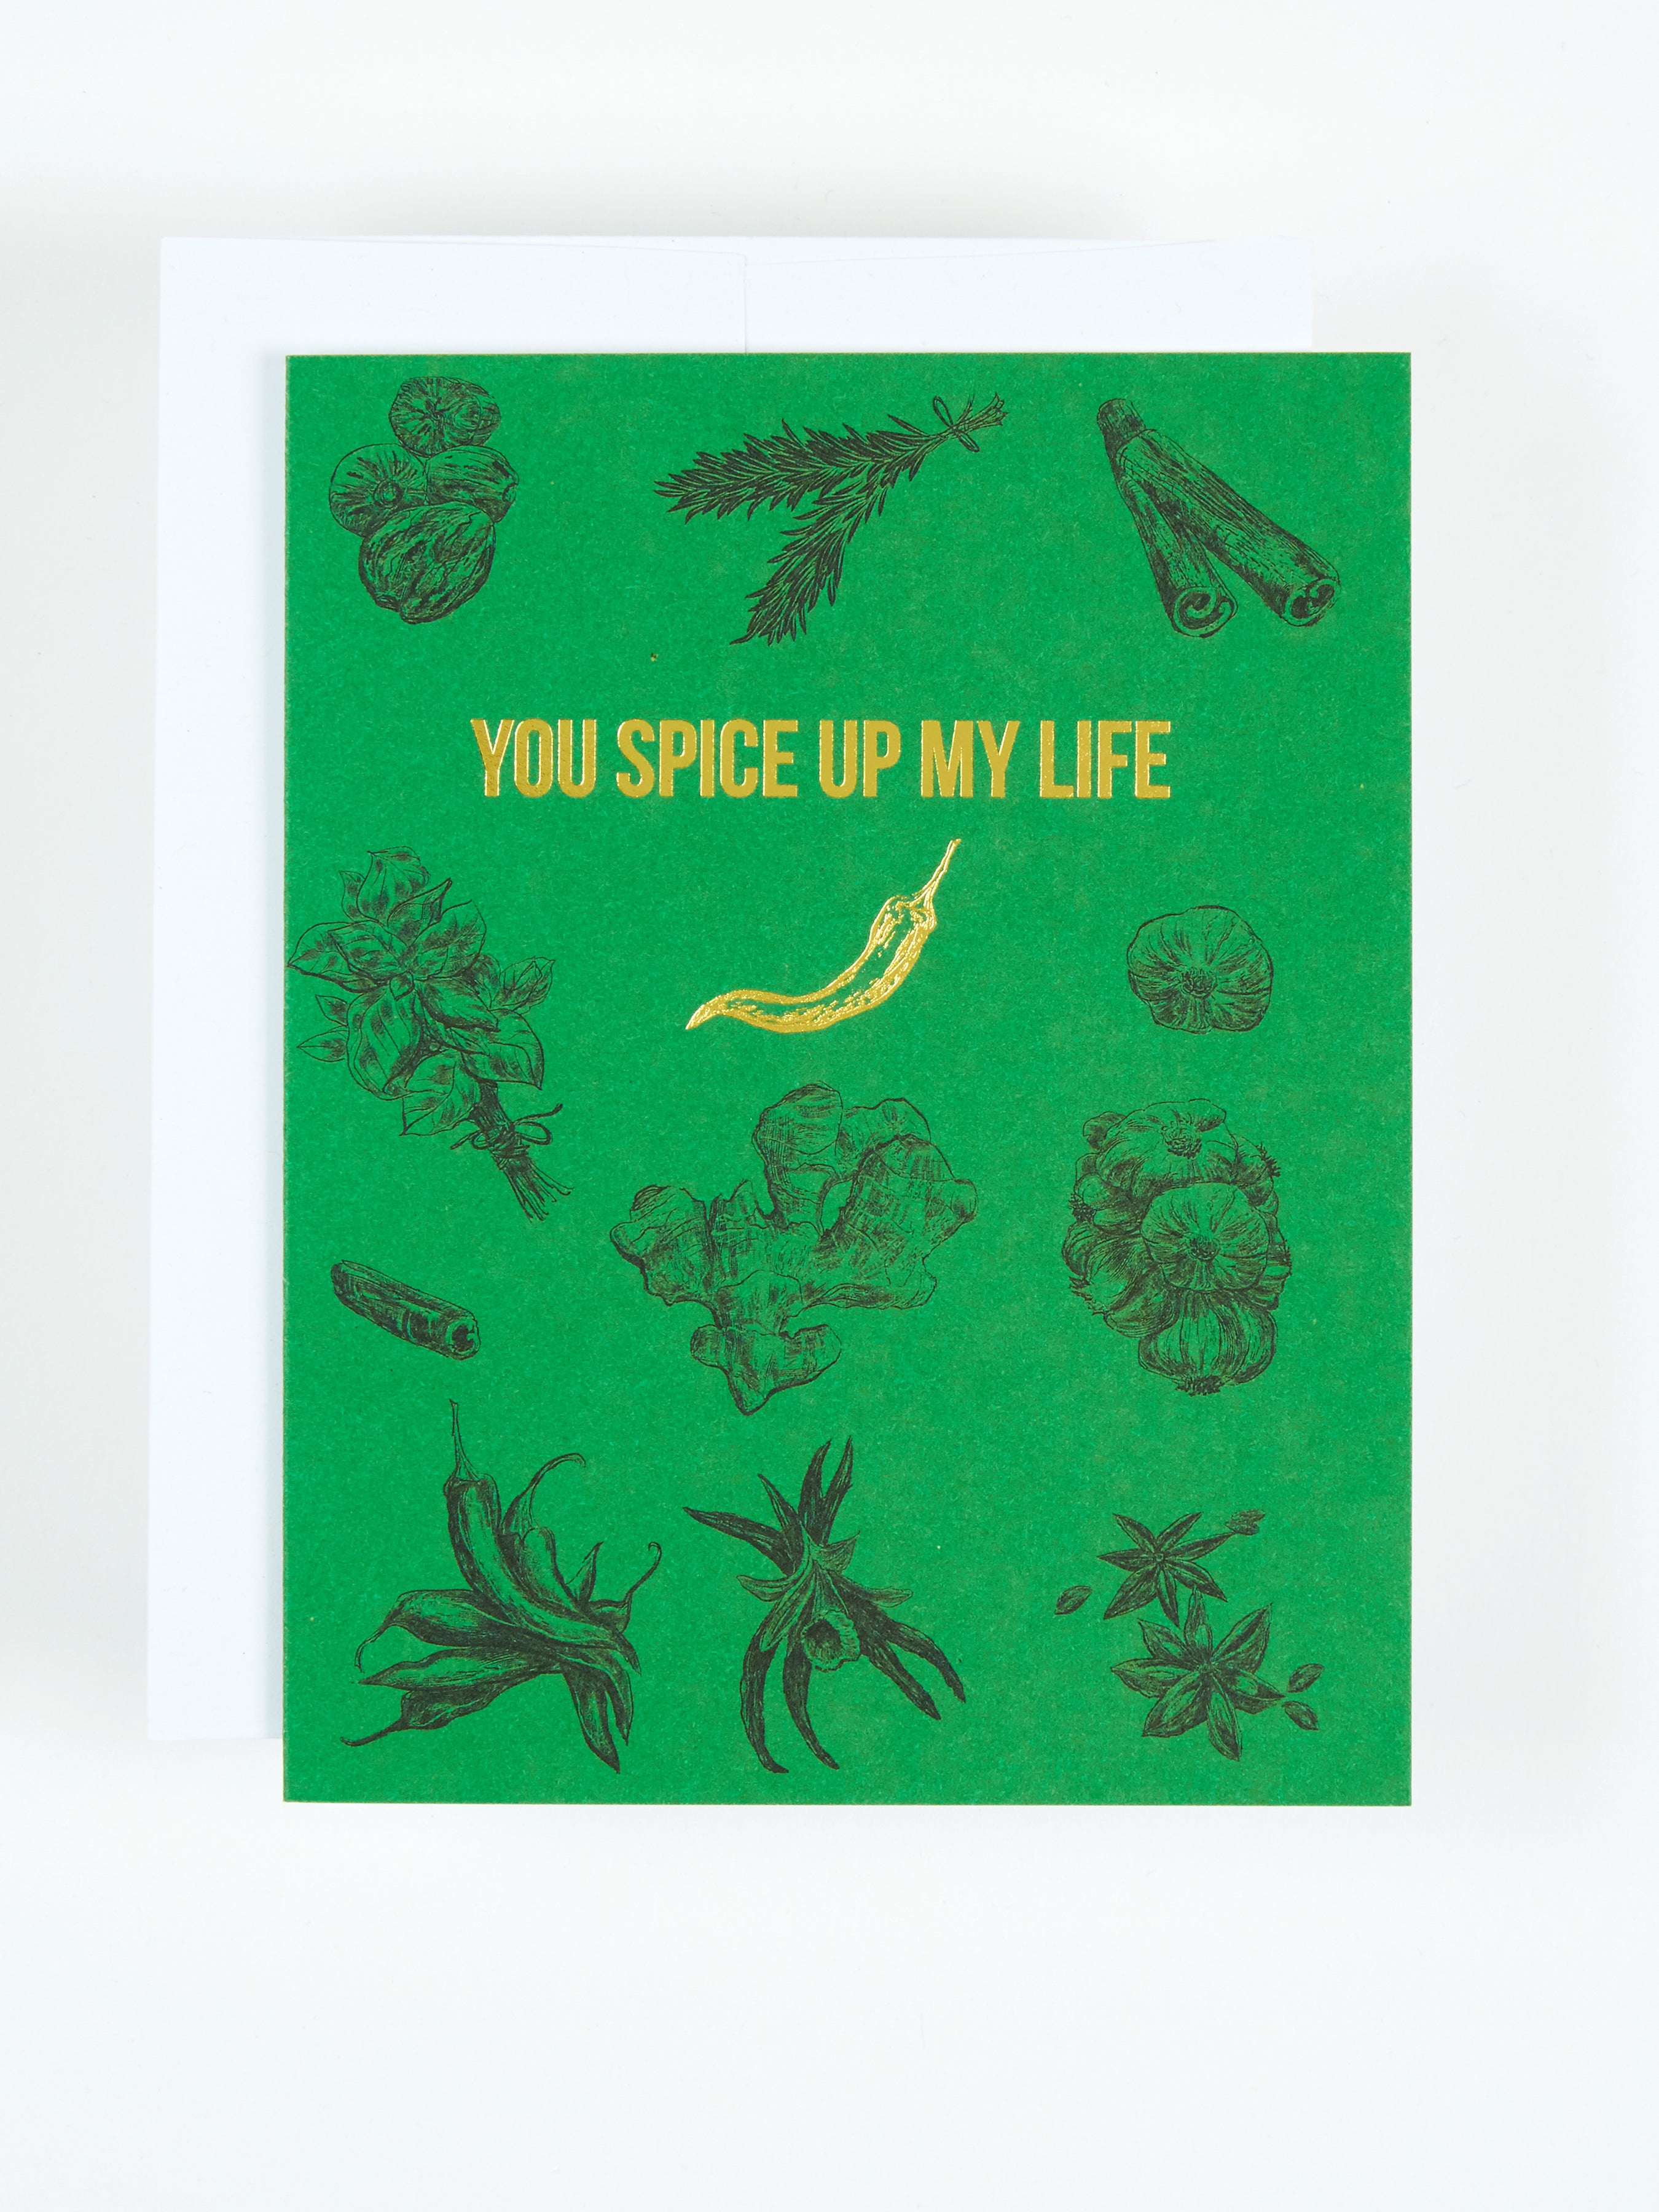 Greeting card with the text YOU SPICE UP MY LIFE amid various spices